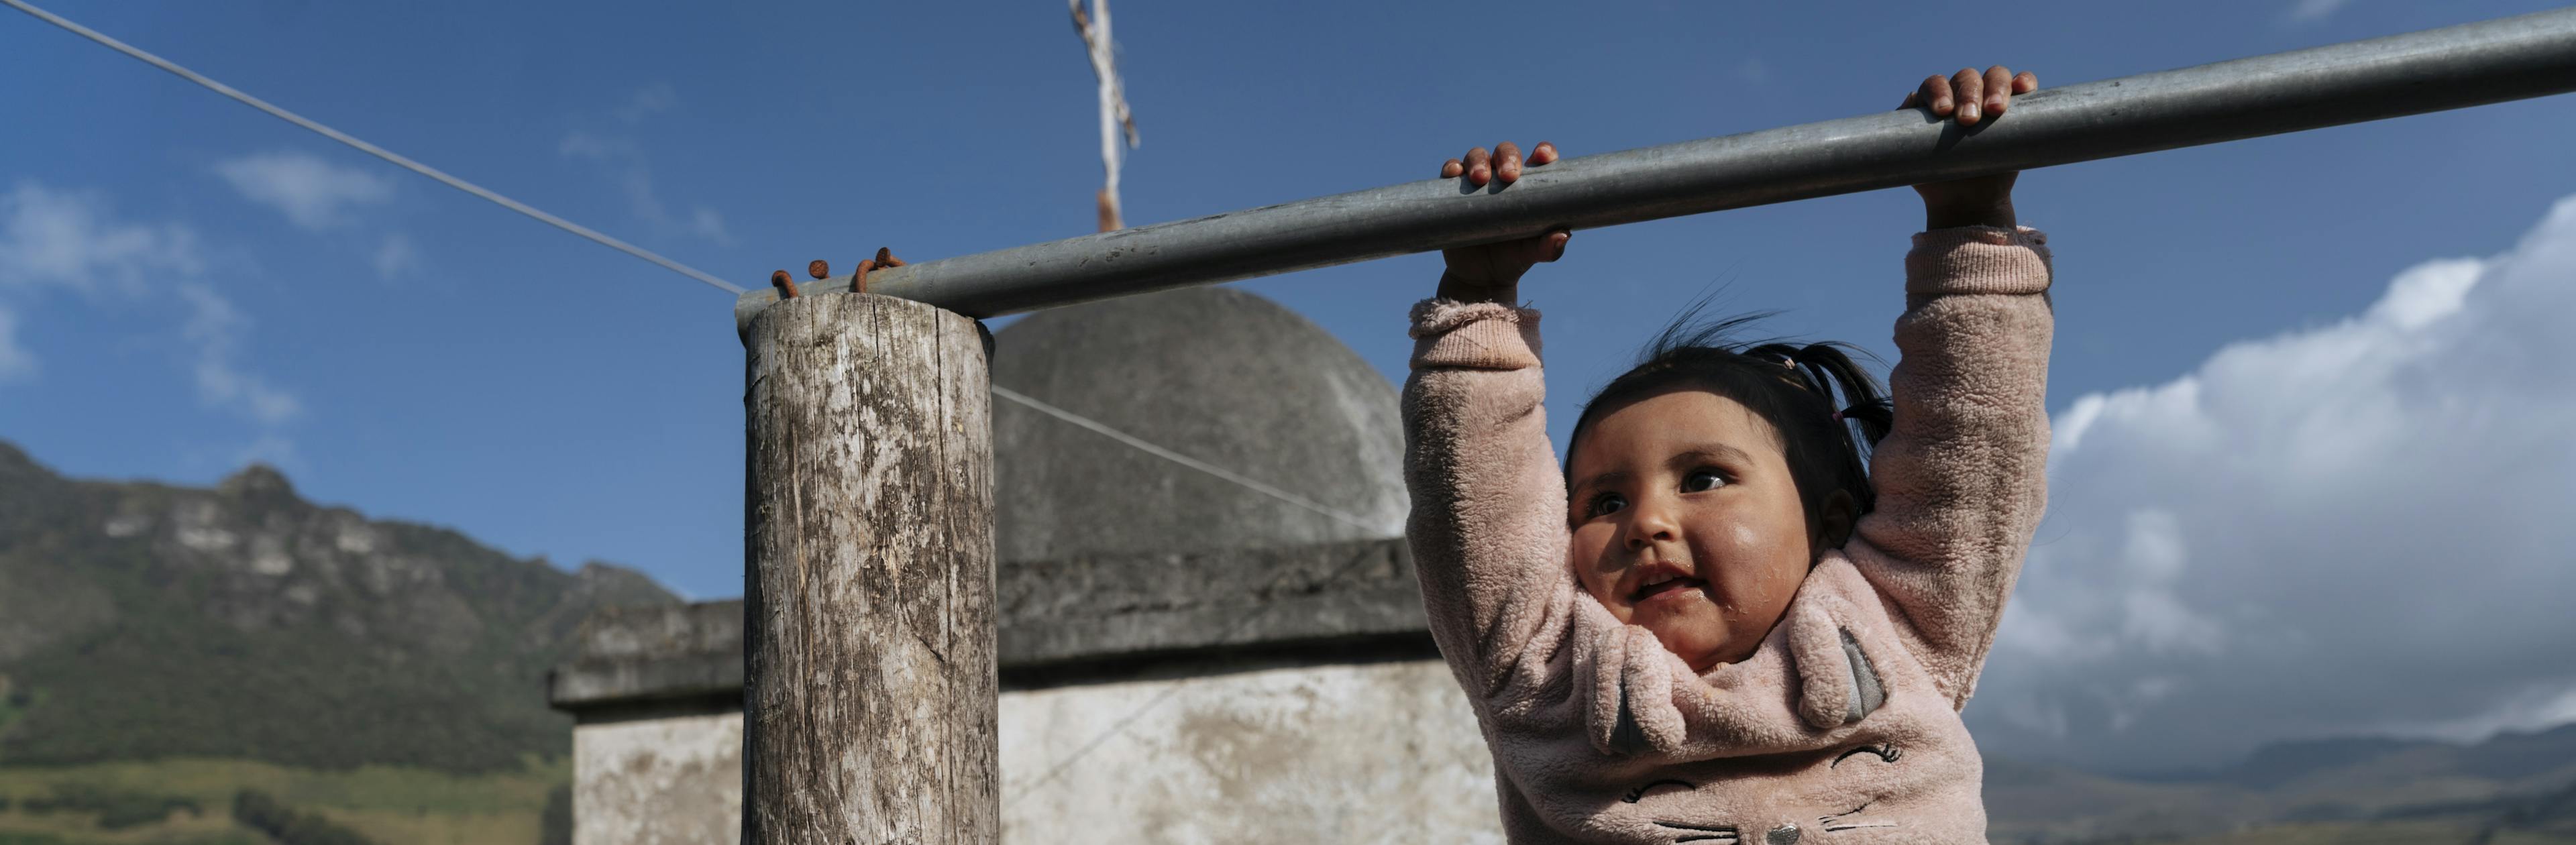 Latest UNICEF report shows 67 million children missed out on one or more vaccinations over three years. In Turugucho, Ecuador, Richard Yanez holds his 2-year-old daughter, Aysel, as she swings on a pole outside their home.